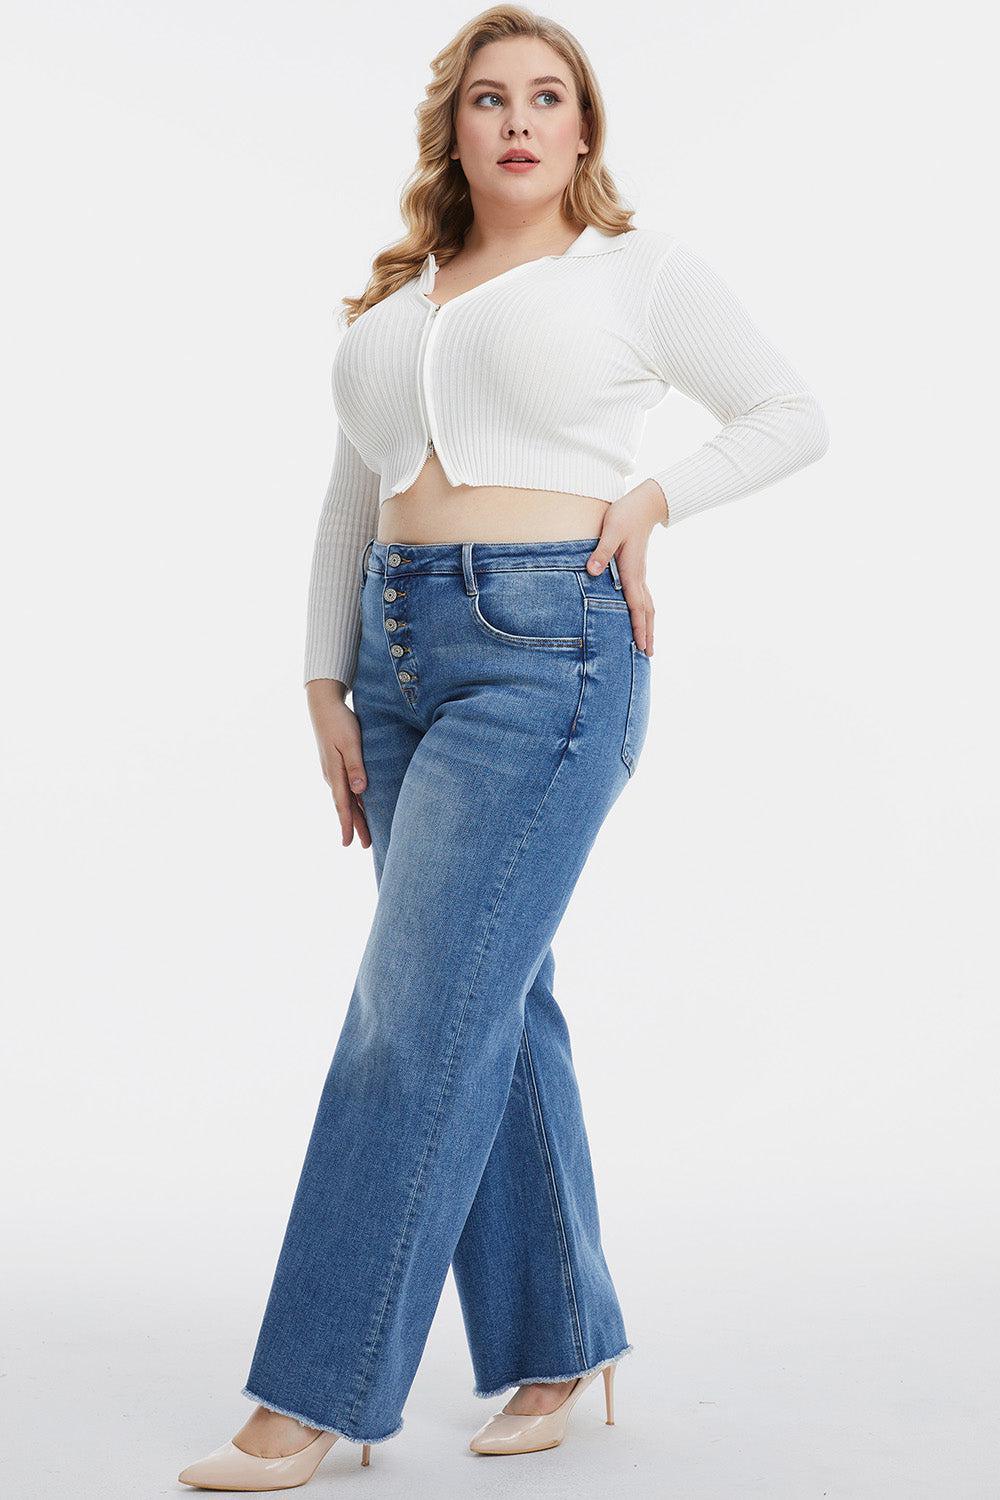 a woman in a white top and jeans